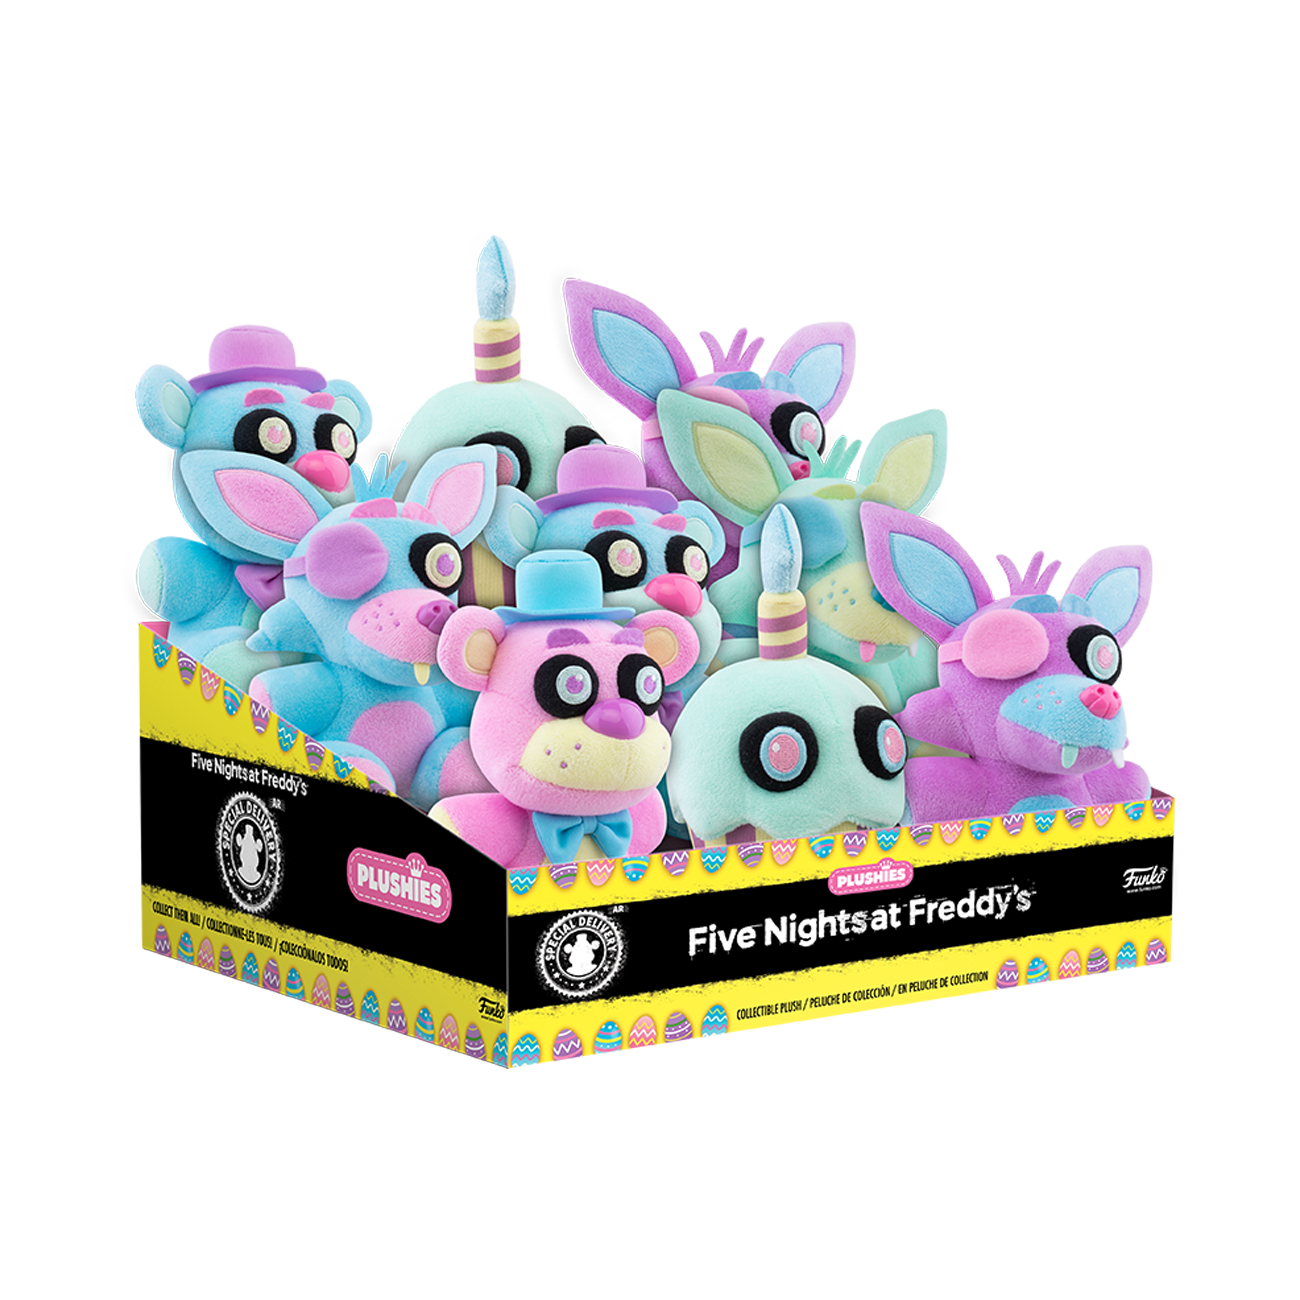  Funko Plush: Five Nights at Freddy's Spring Colorway